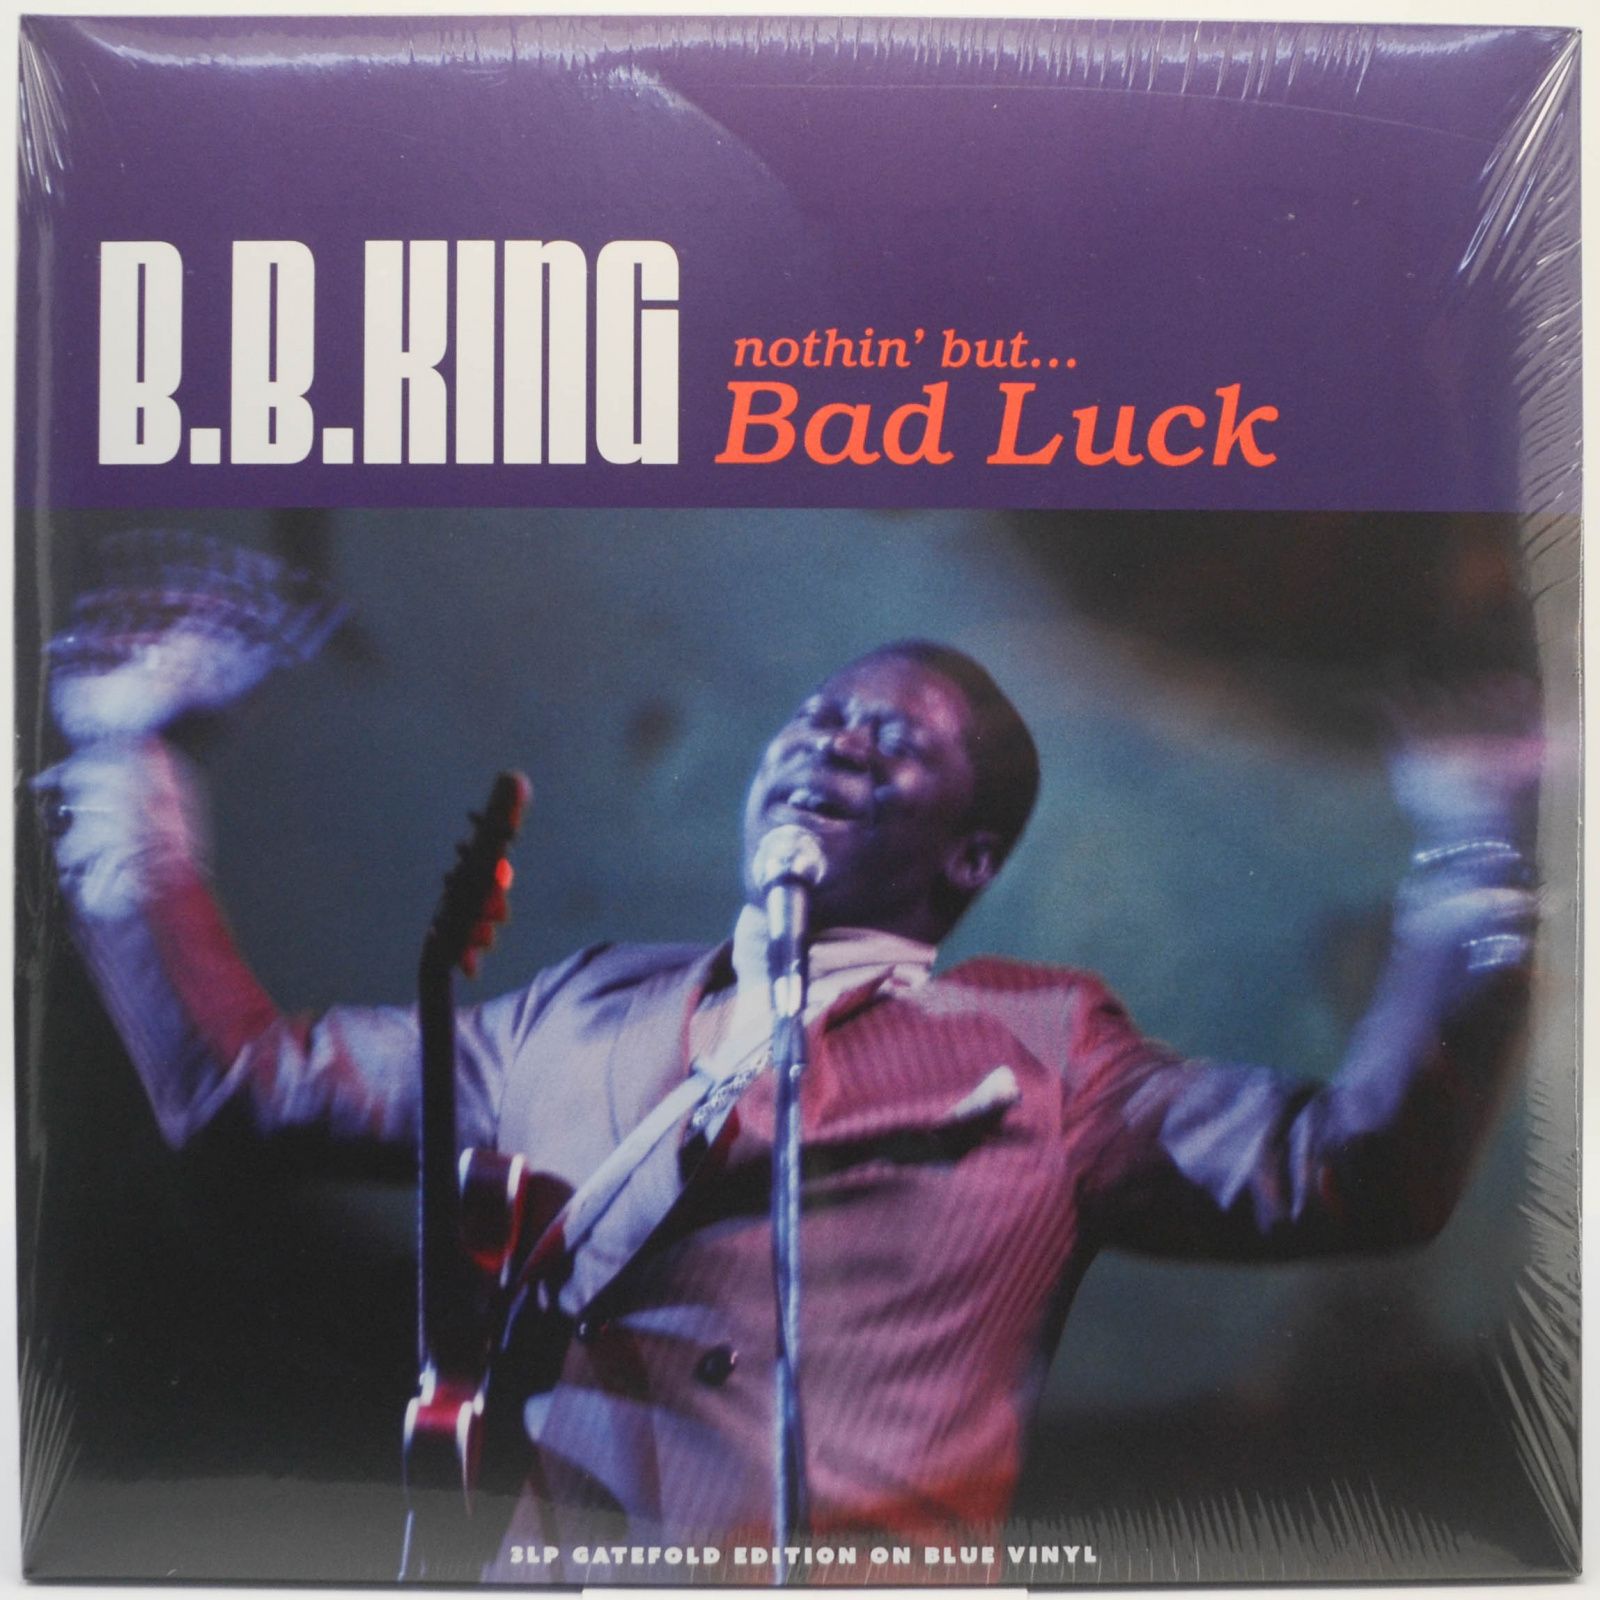 Nothin' But... Bad Luck (3LP), 2016